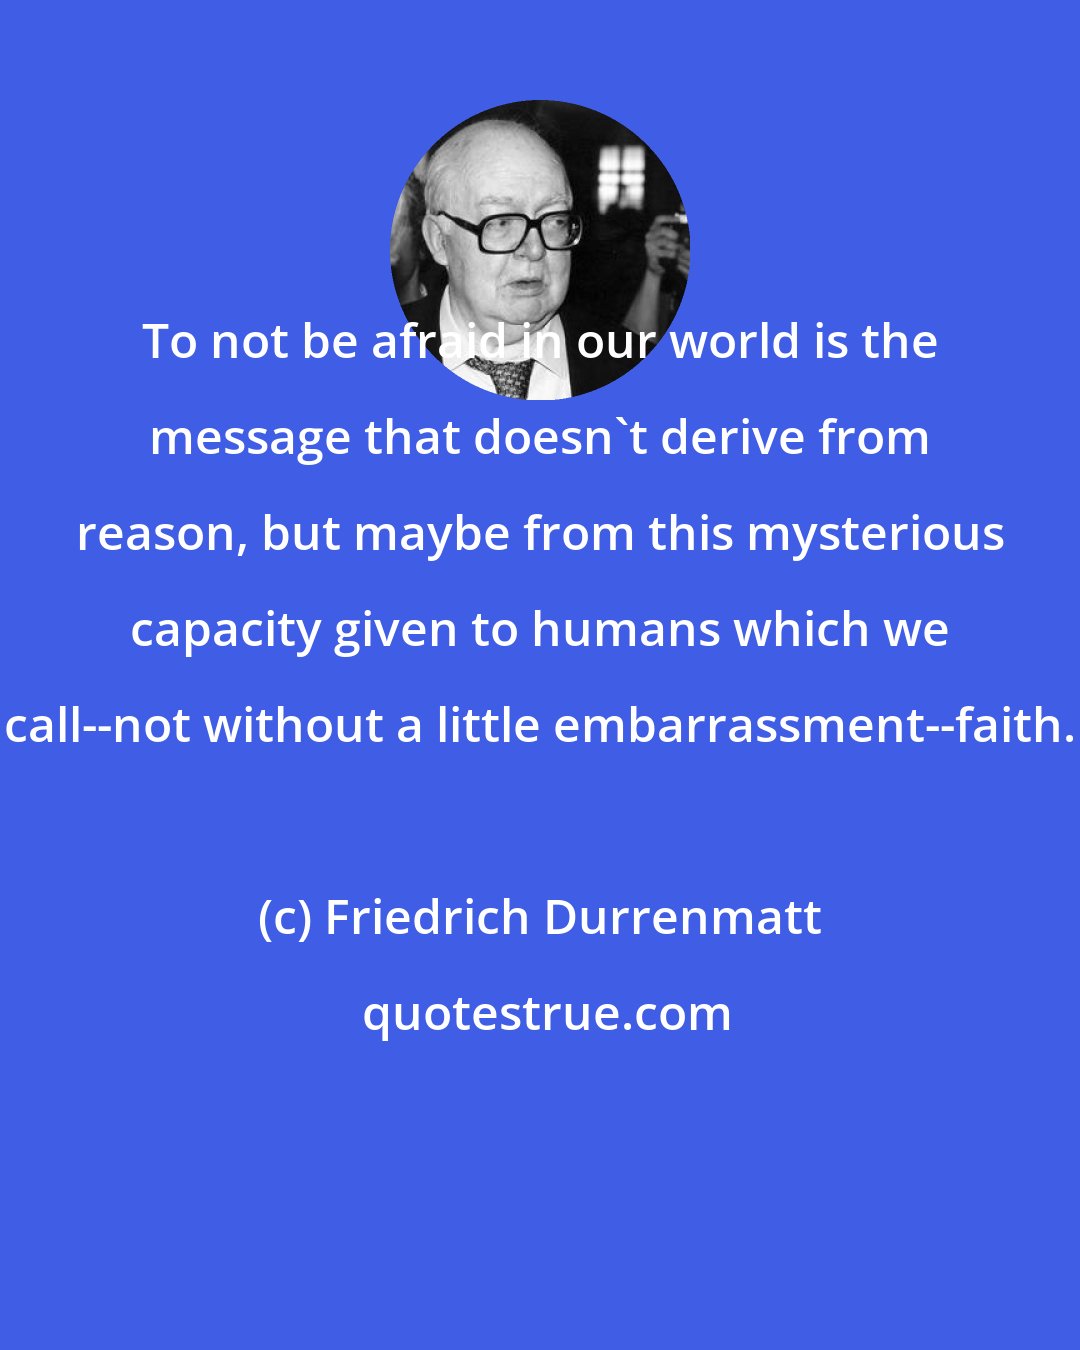 Friedrich Durrenmatt: To not be afraid in our world is the message that doesn't derive from reason, but maybe from this mysterious capacity given to humans which we call--not without a little embarrassment--faith.